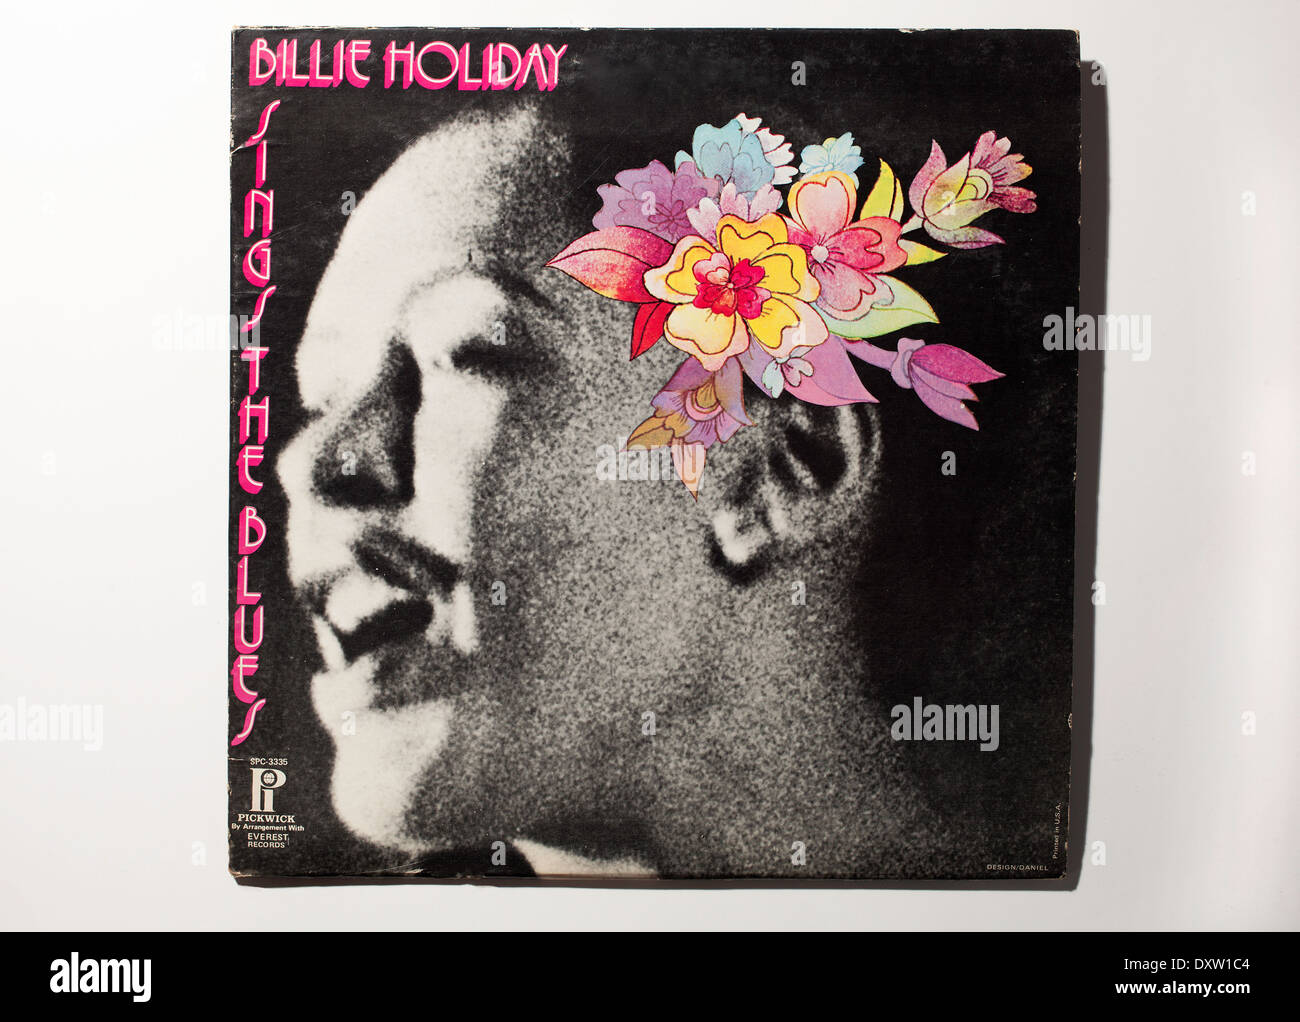 Vintage record album cover of singer Billie Holiday, Sings the Blues, on Pickwick International records, 1973. Stock Photo